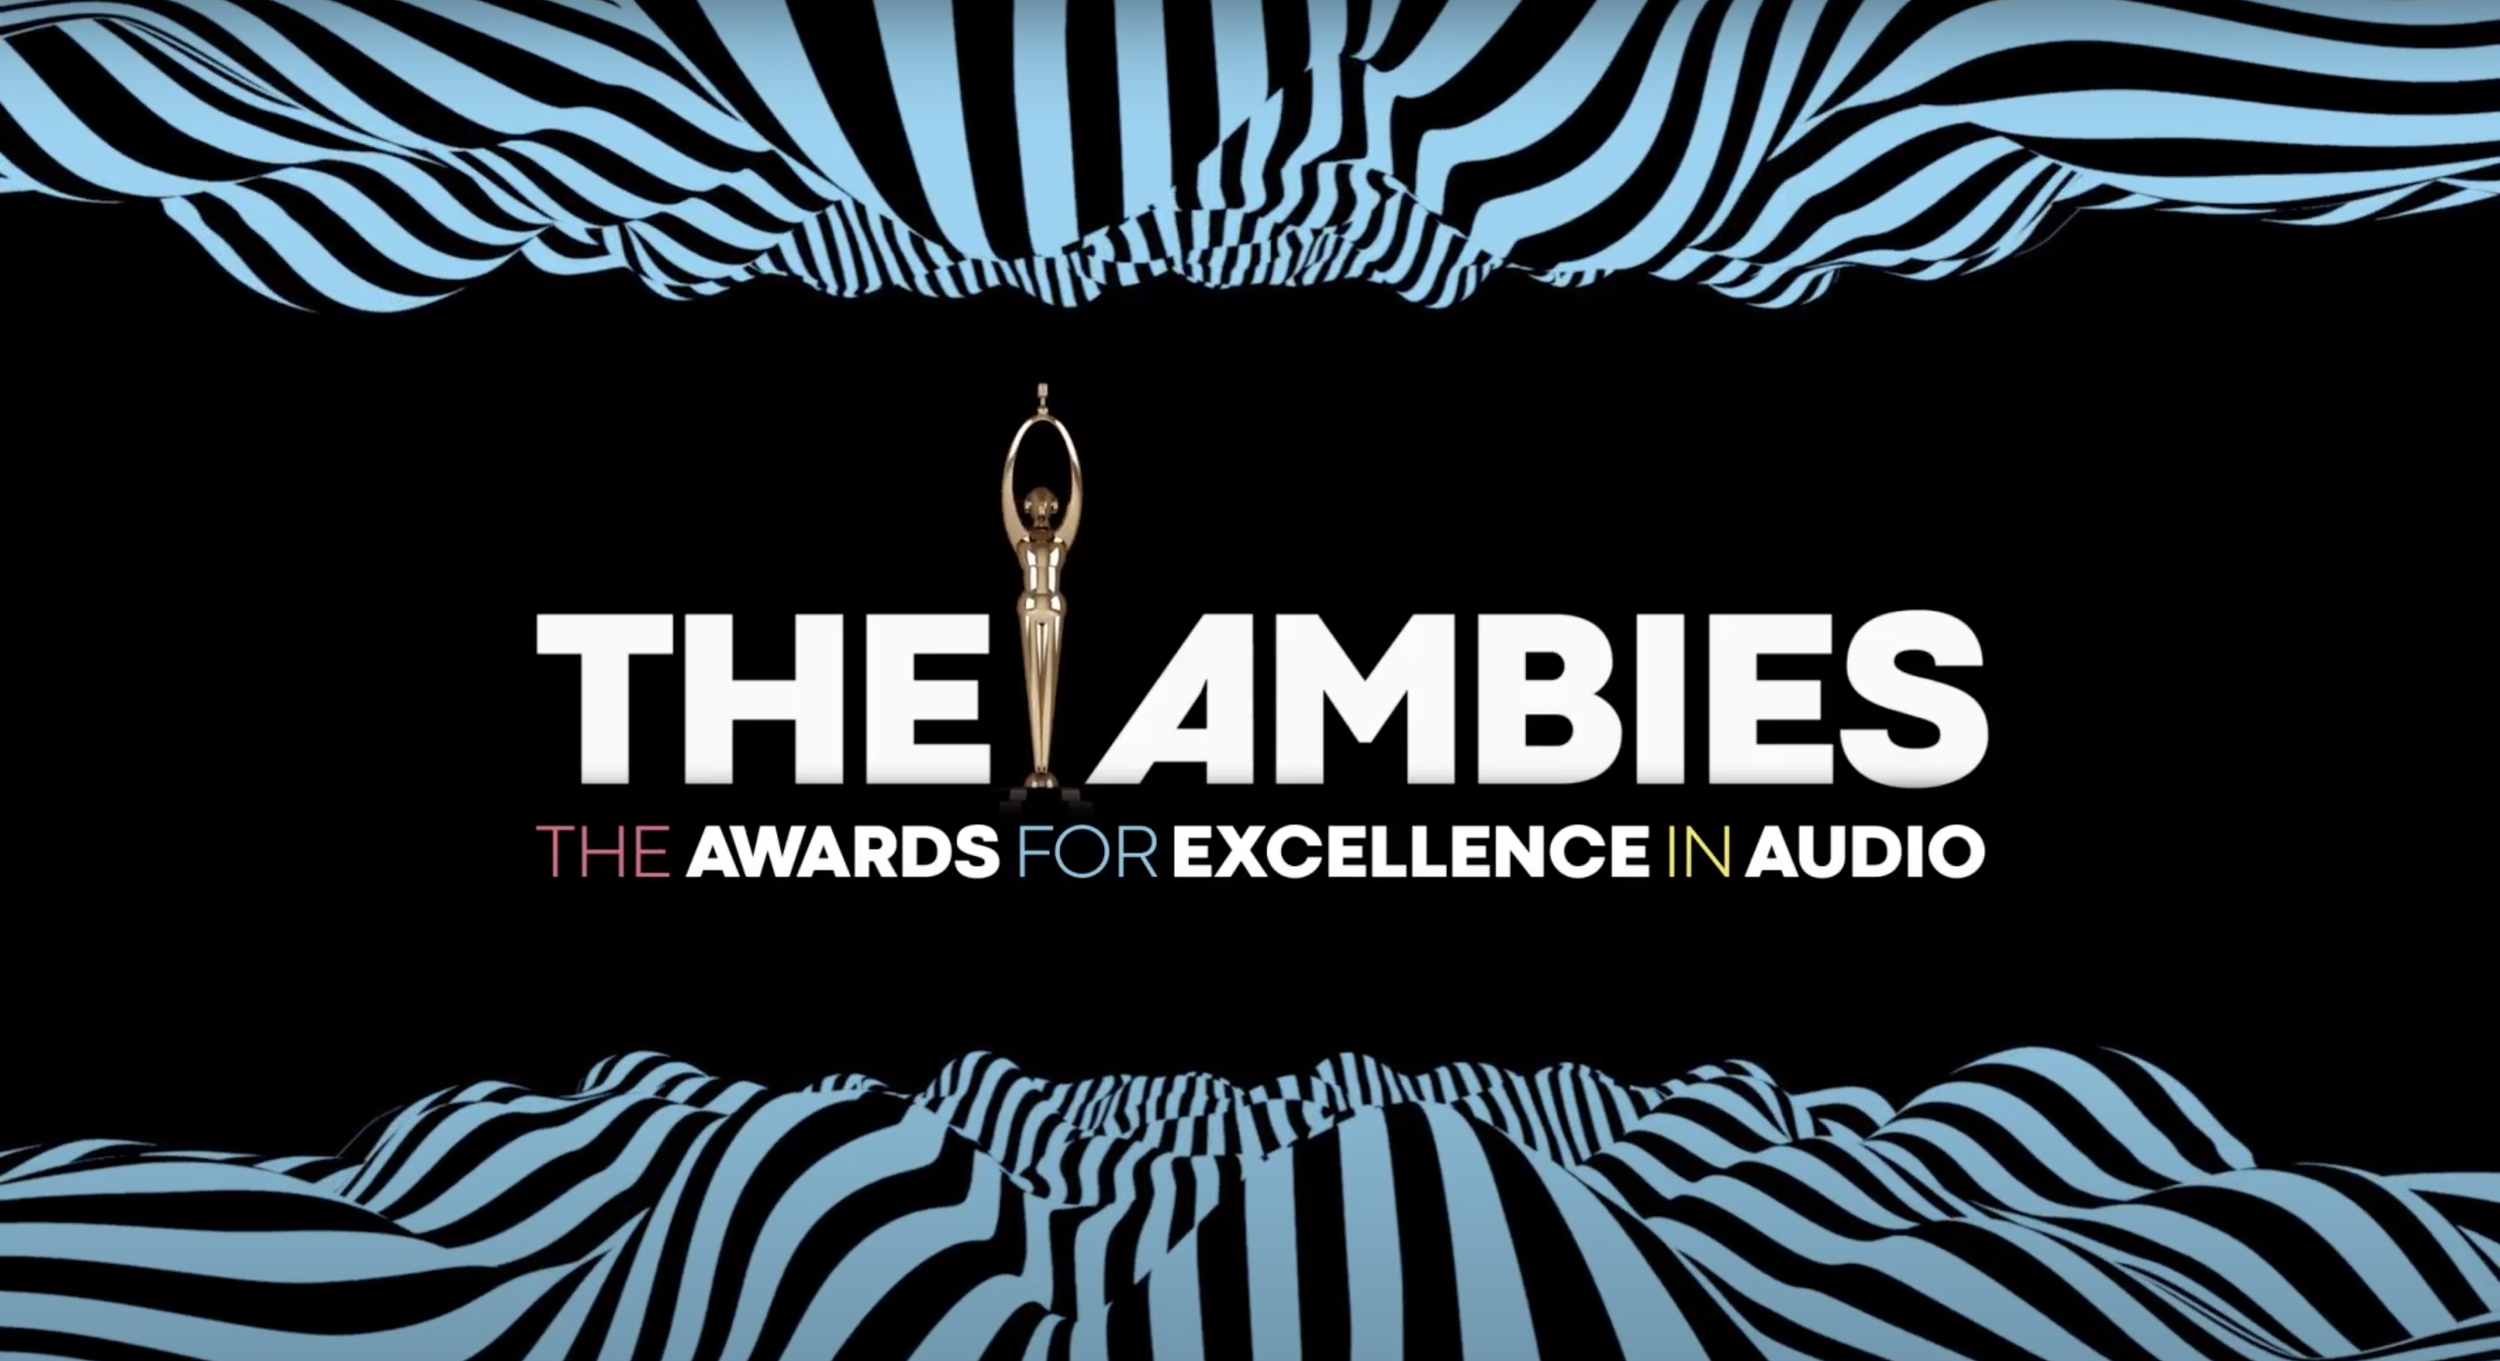 Congratulations to RPJ Client Novel Audio on the Nomination of “The Girlfriends” for an Ambie Award!